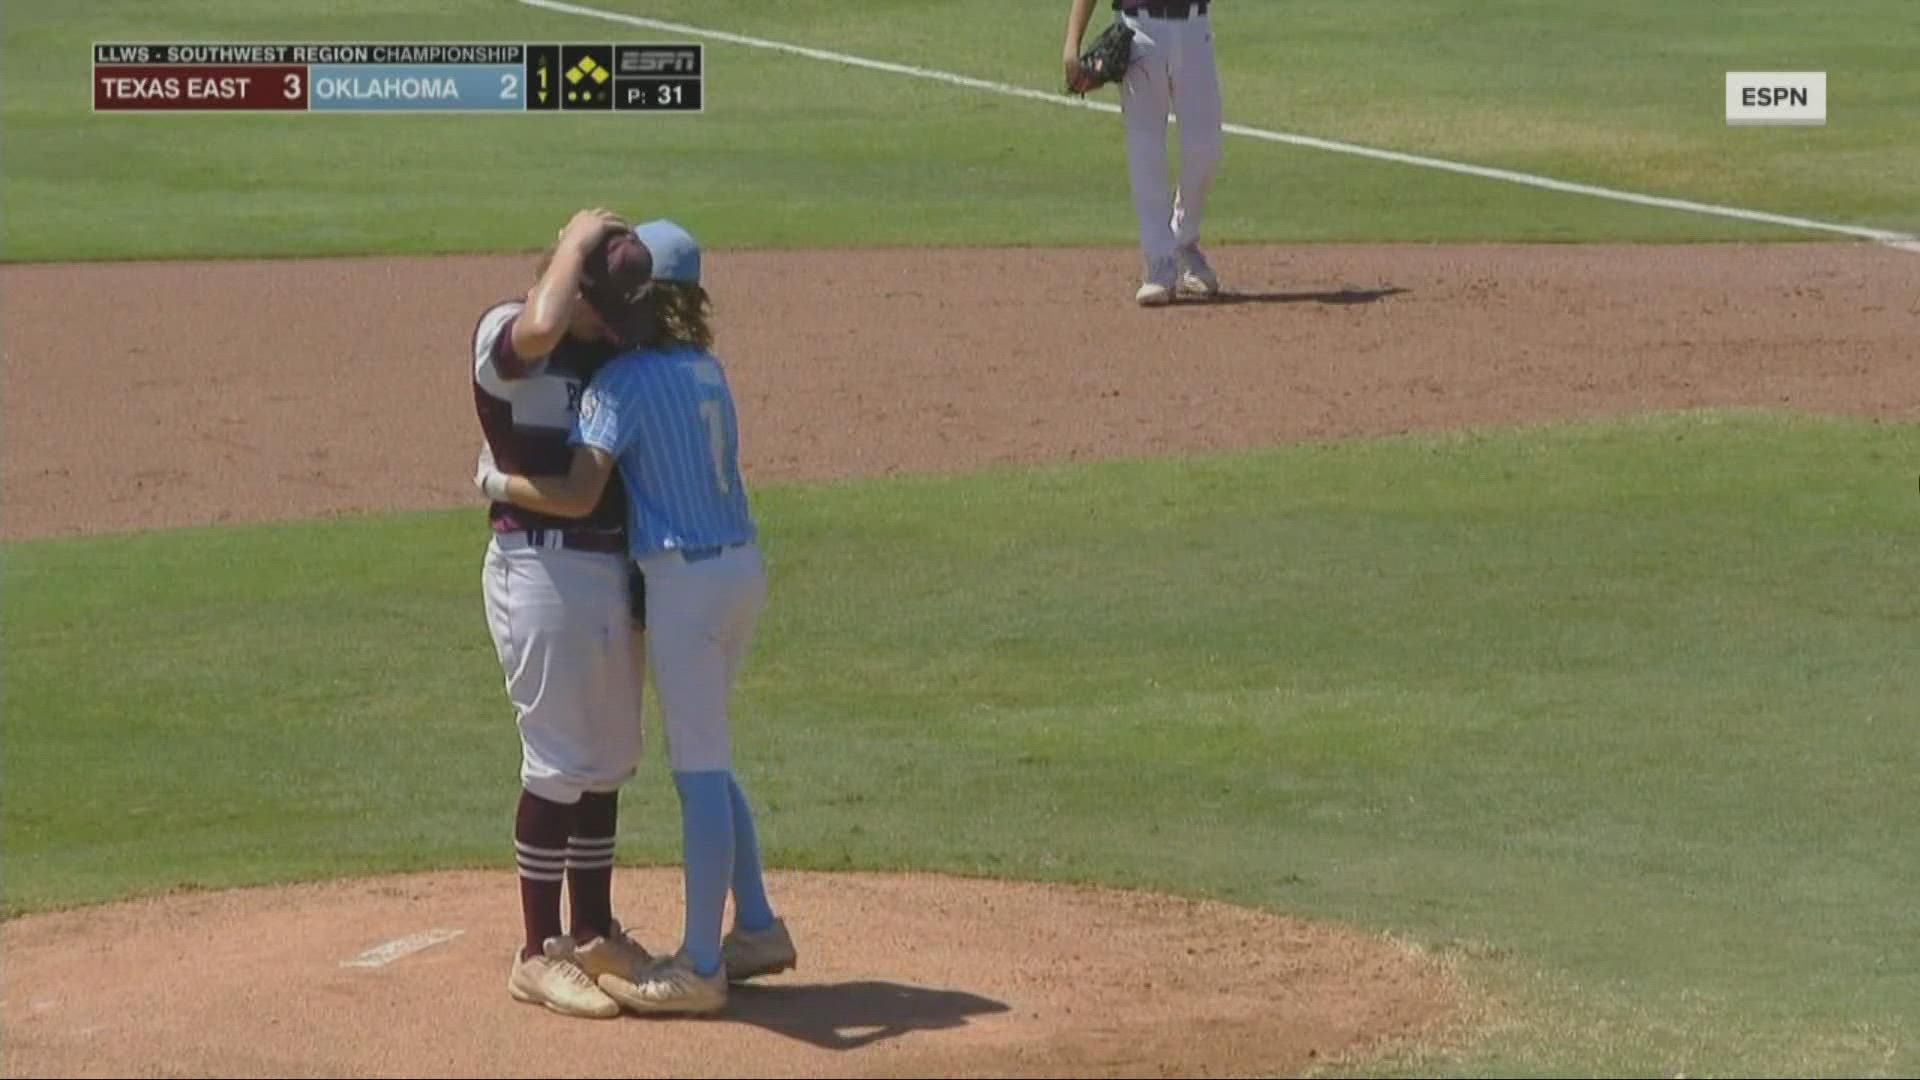 Today's Show Us Something Good comes from the Little League World Series qualifiers, where a batter from Oklahoma has gone viral for a display of sportsmanship.